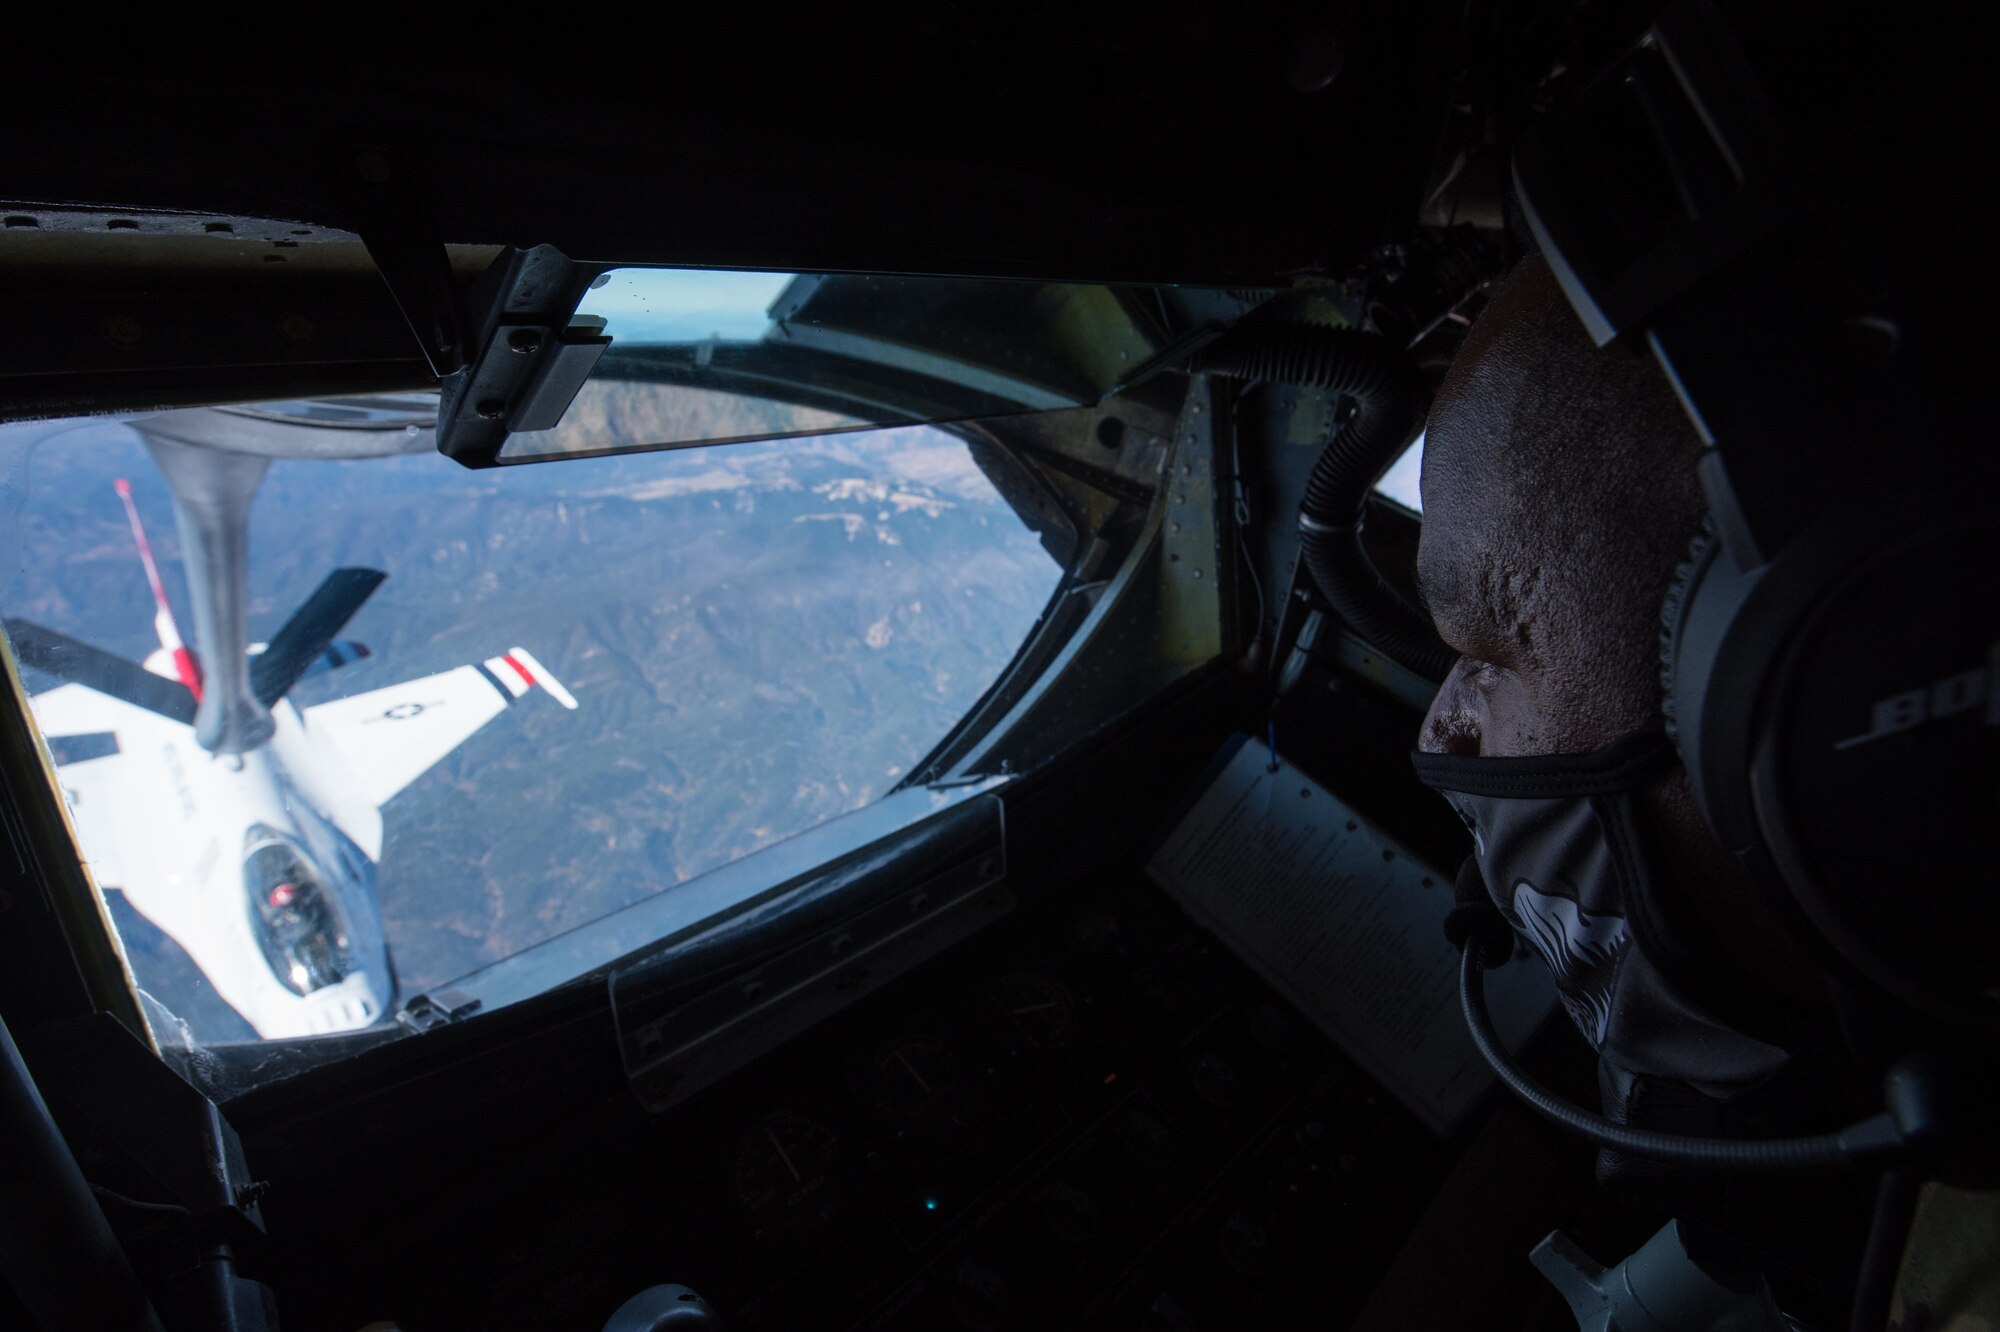 Tech. Sgt. Bobby Jones, 350th Air Refueling Squadron in-flight refueling specialist, uses the boom of a KC-135 Stratotanker to transfer fuel to an F-16 Fighting Falcon Thunderbird Oct. 15, 2020, through the skies of New Mexico. The KC-135 passed off fuel to the Thunderbirds, allowing for a quick, non-stop route between destinations. ((U.S. Air Force photo by Senior Airman Alexi Bosarge)